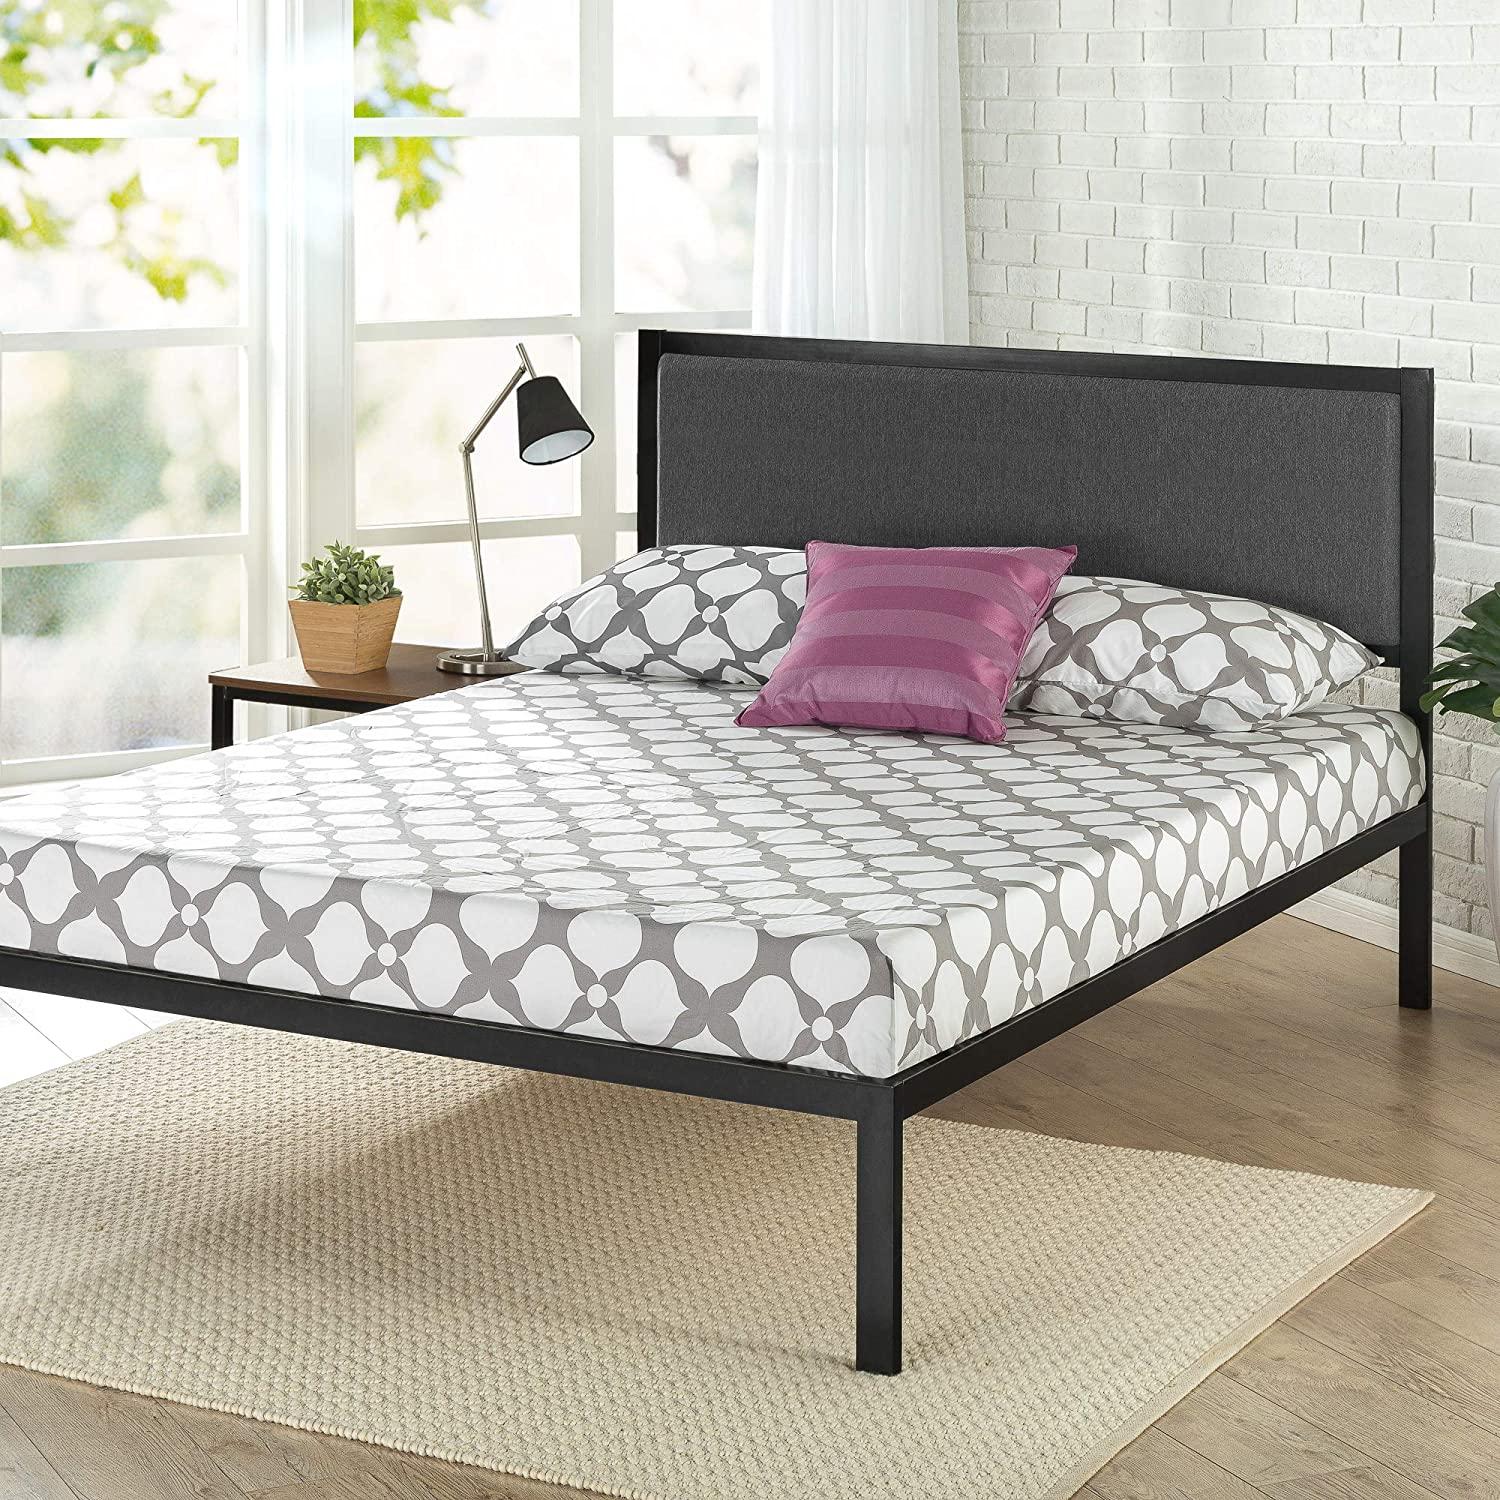 Zinus Korey 38in Metal Platform Bed with Upholstered Headboard for $141.91 Shipped